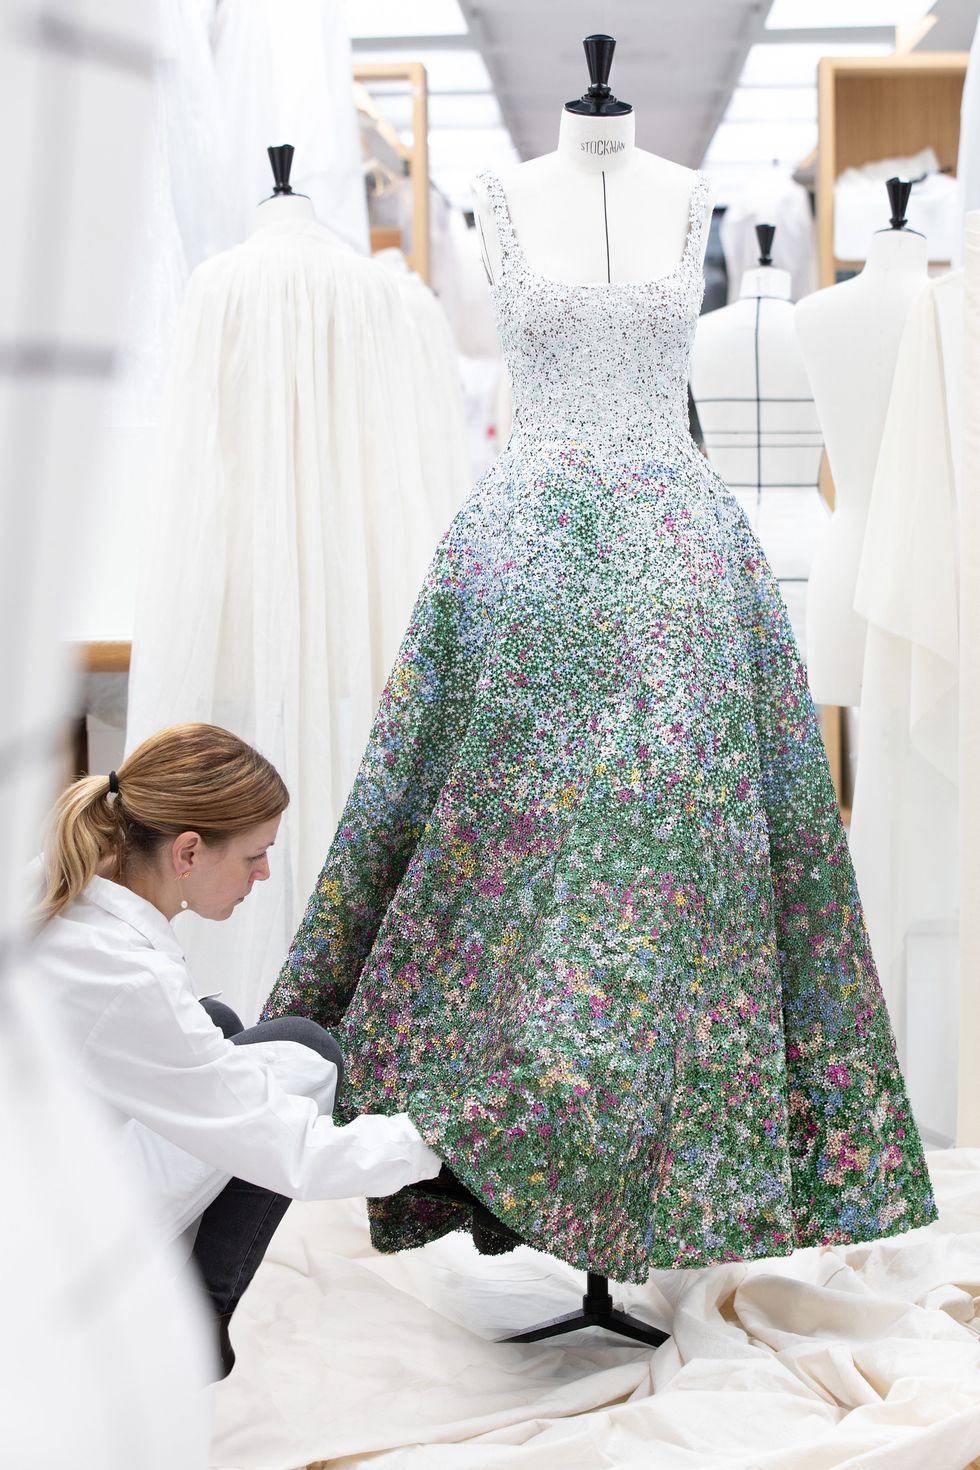 the intricate dress was inspired by impressionist paintings